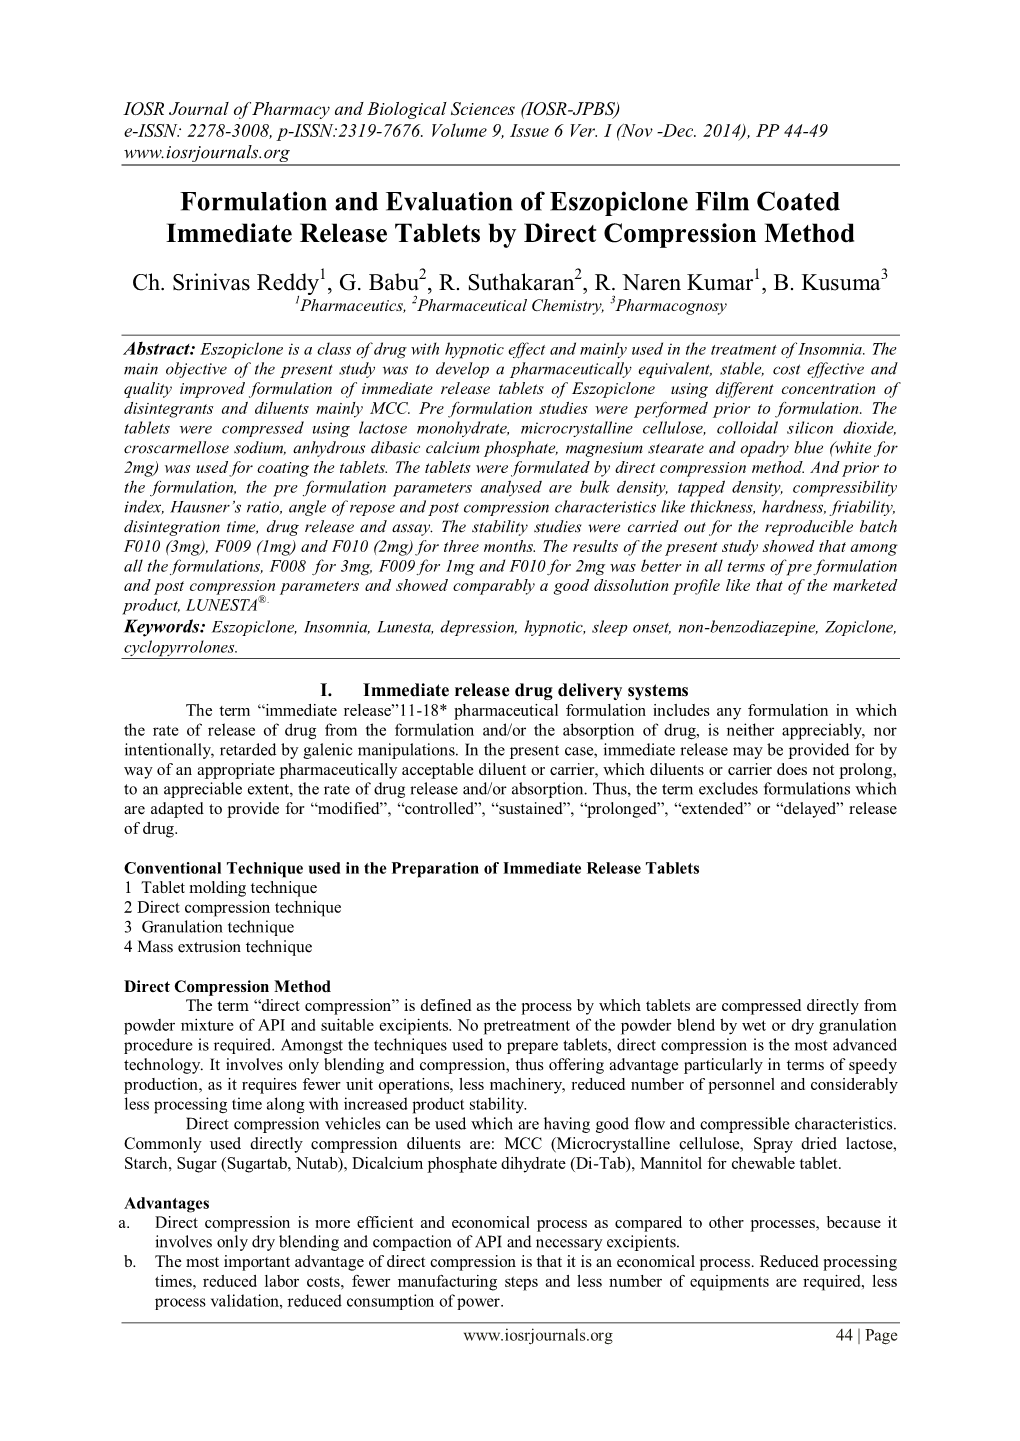 Formulation and Evaluation of Eszopiclone Film Coated Immediate Release Tablets by Direct Compression Method